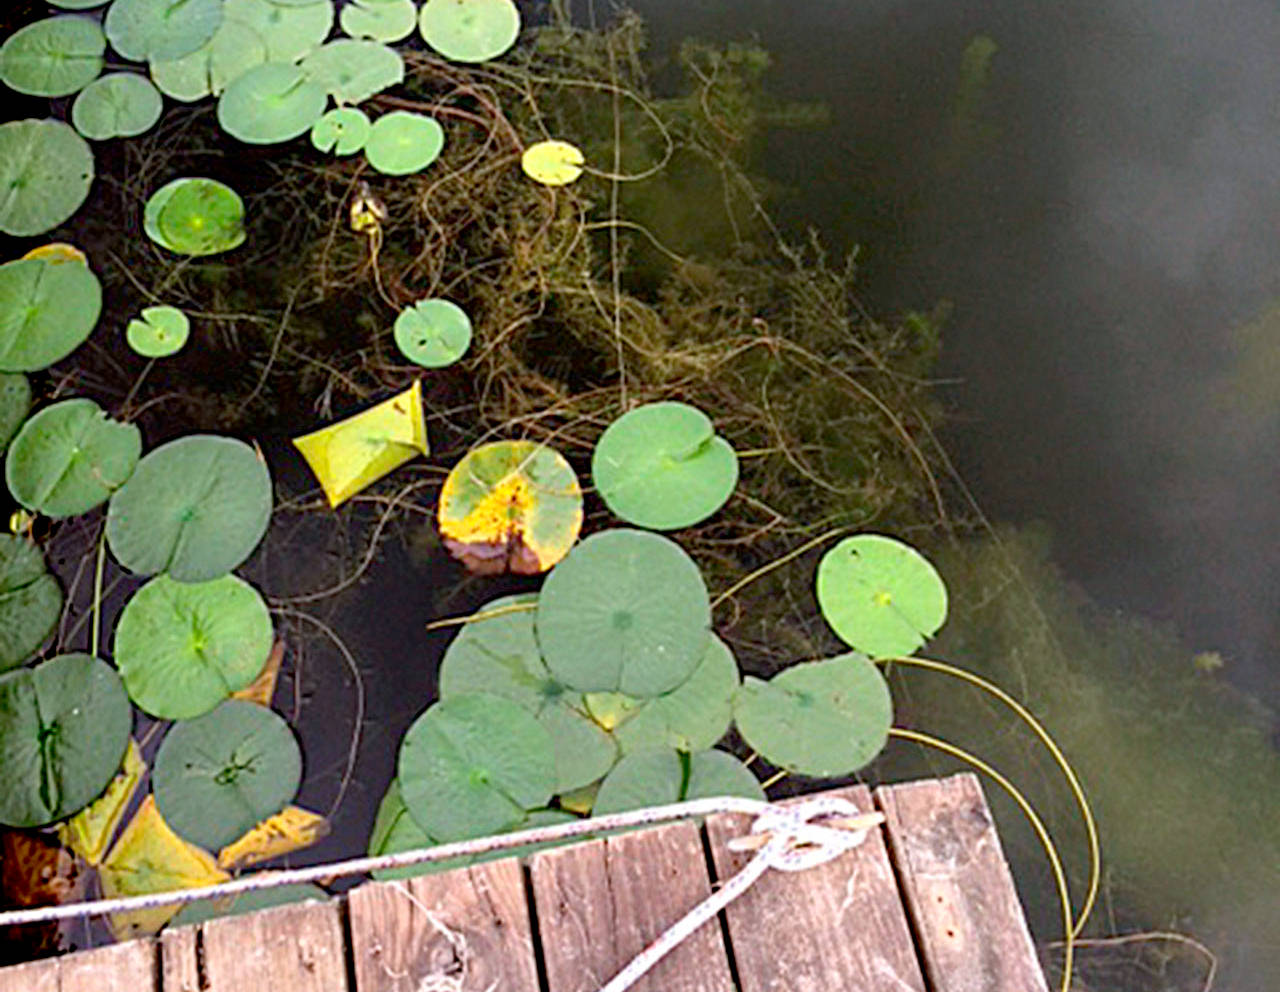 Fragrant water-lily floats on top of Lake Ballinger and Eurasian milfoil is seen beneath the surface. Both are classified as invasive plants that affect the lake’s water quality. (City of Mountlake Terrace)